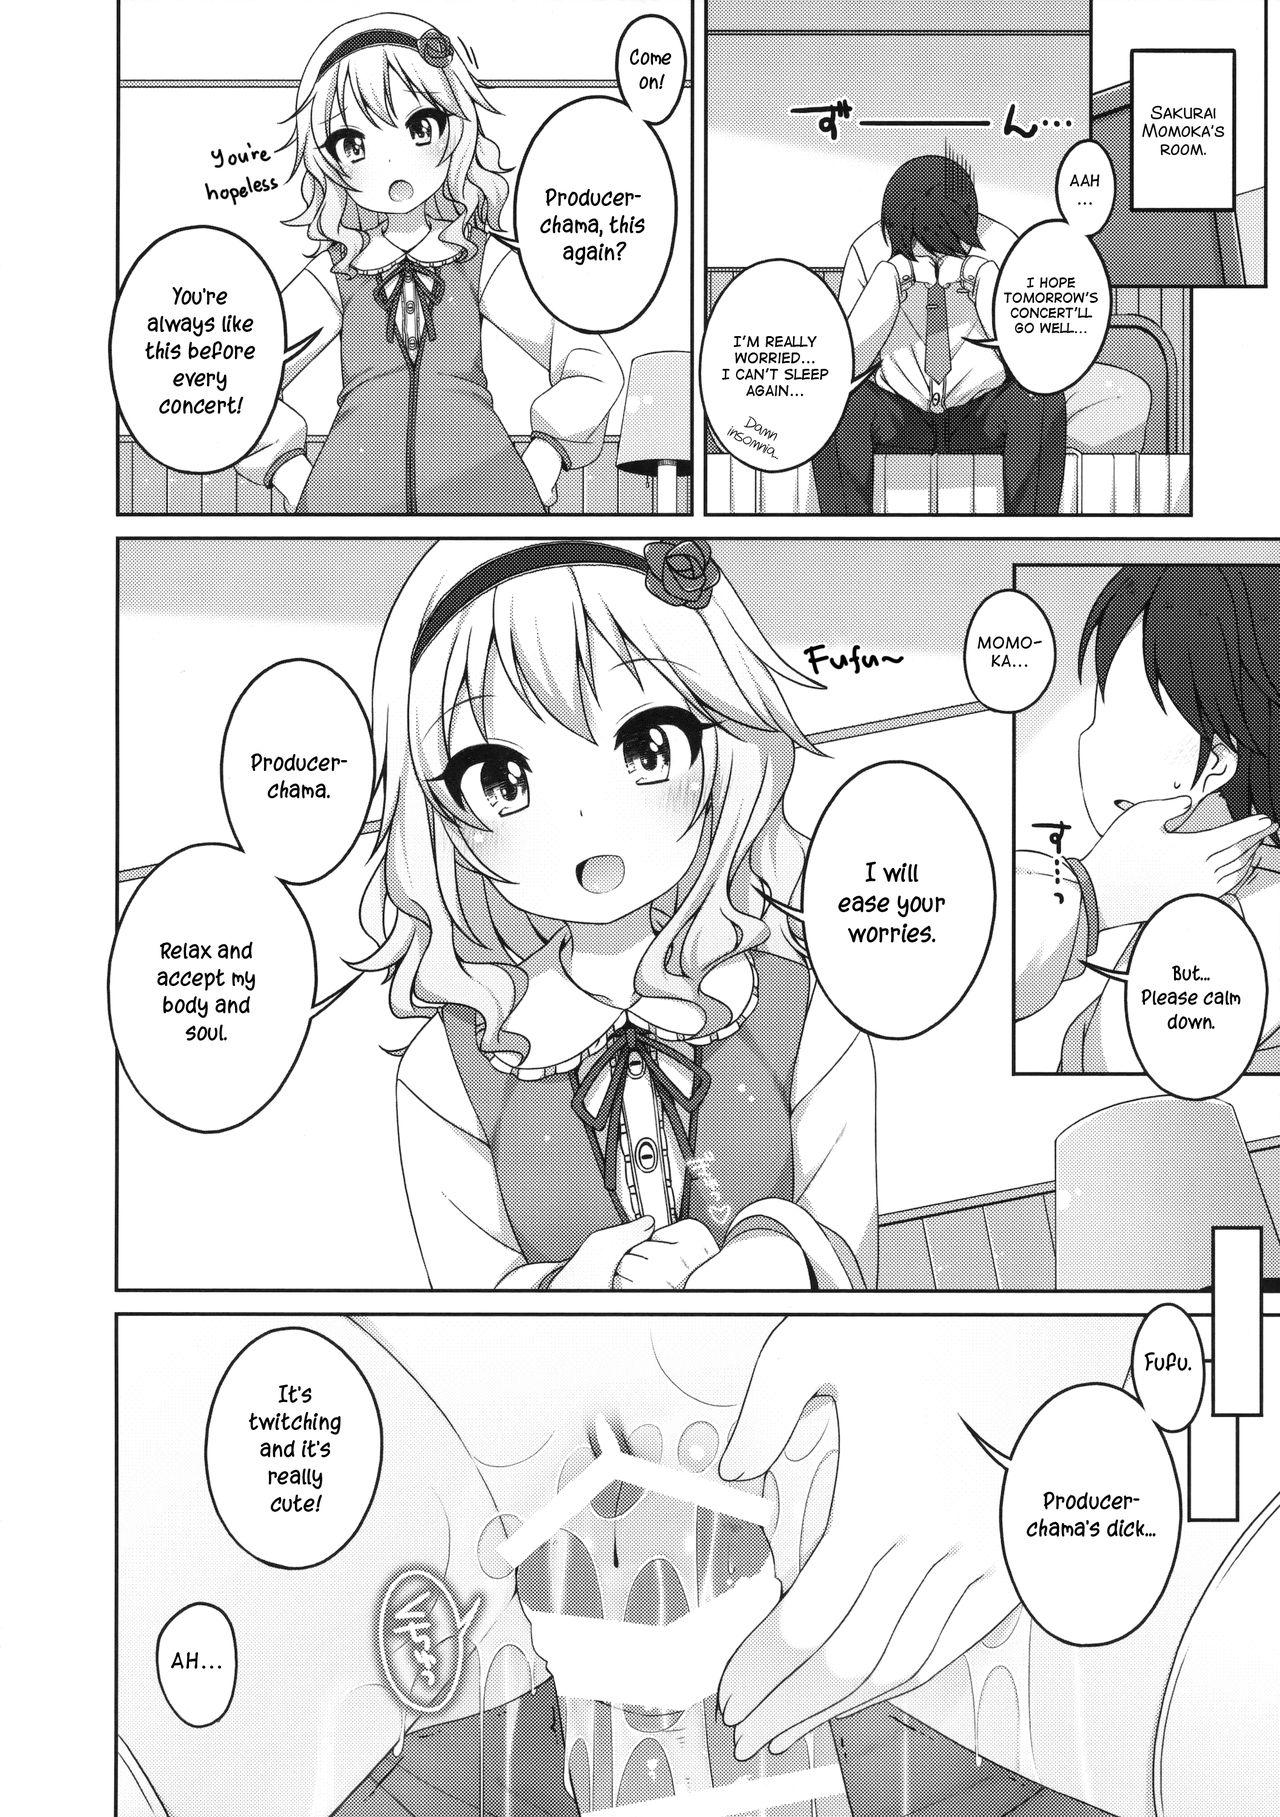 Staxxx Live no Mae no Hi wa | The day before the concert - The idolmaster Gilf - Page 7